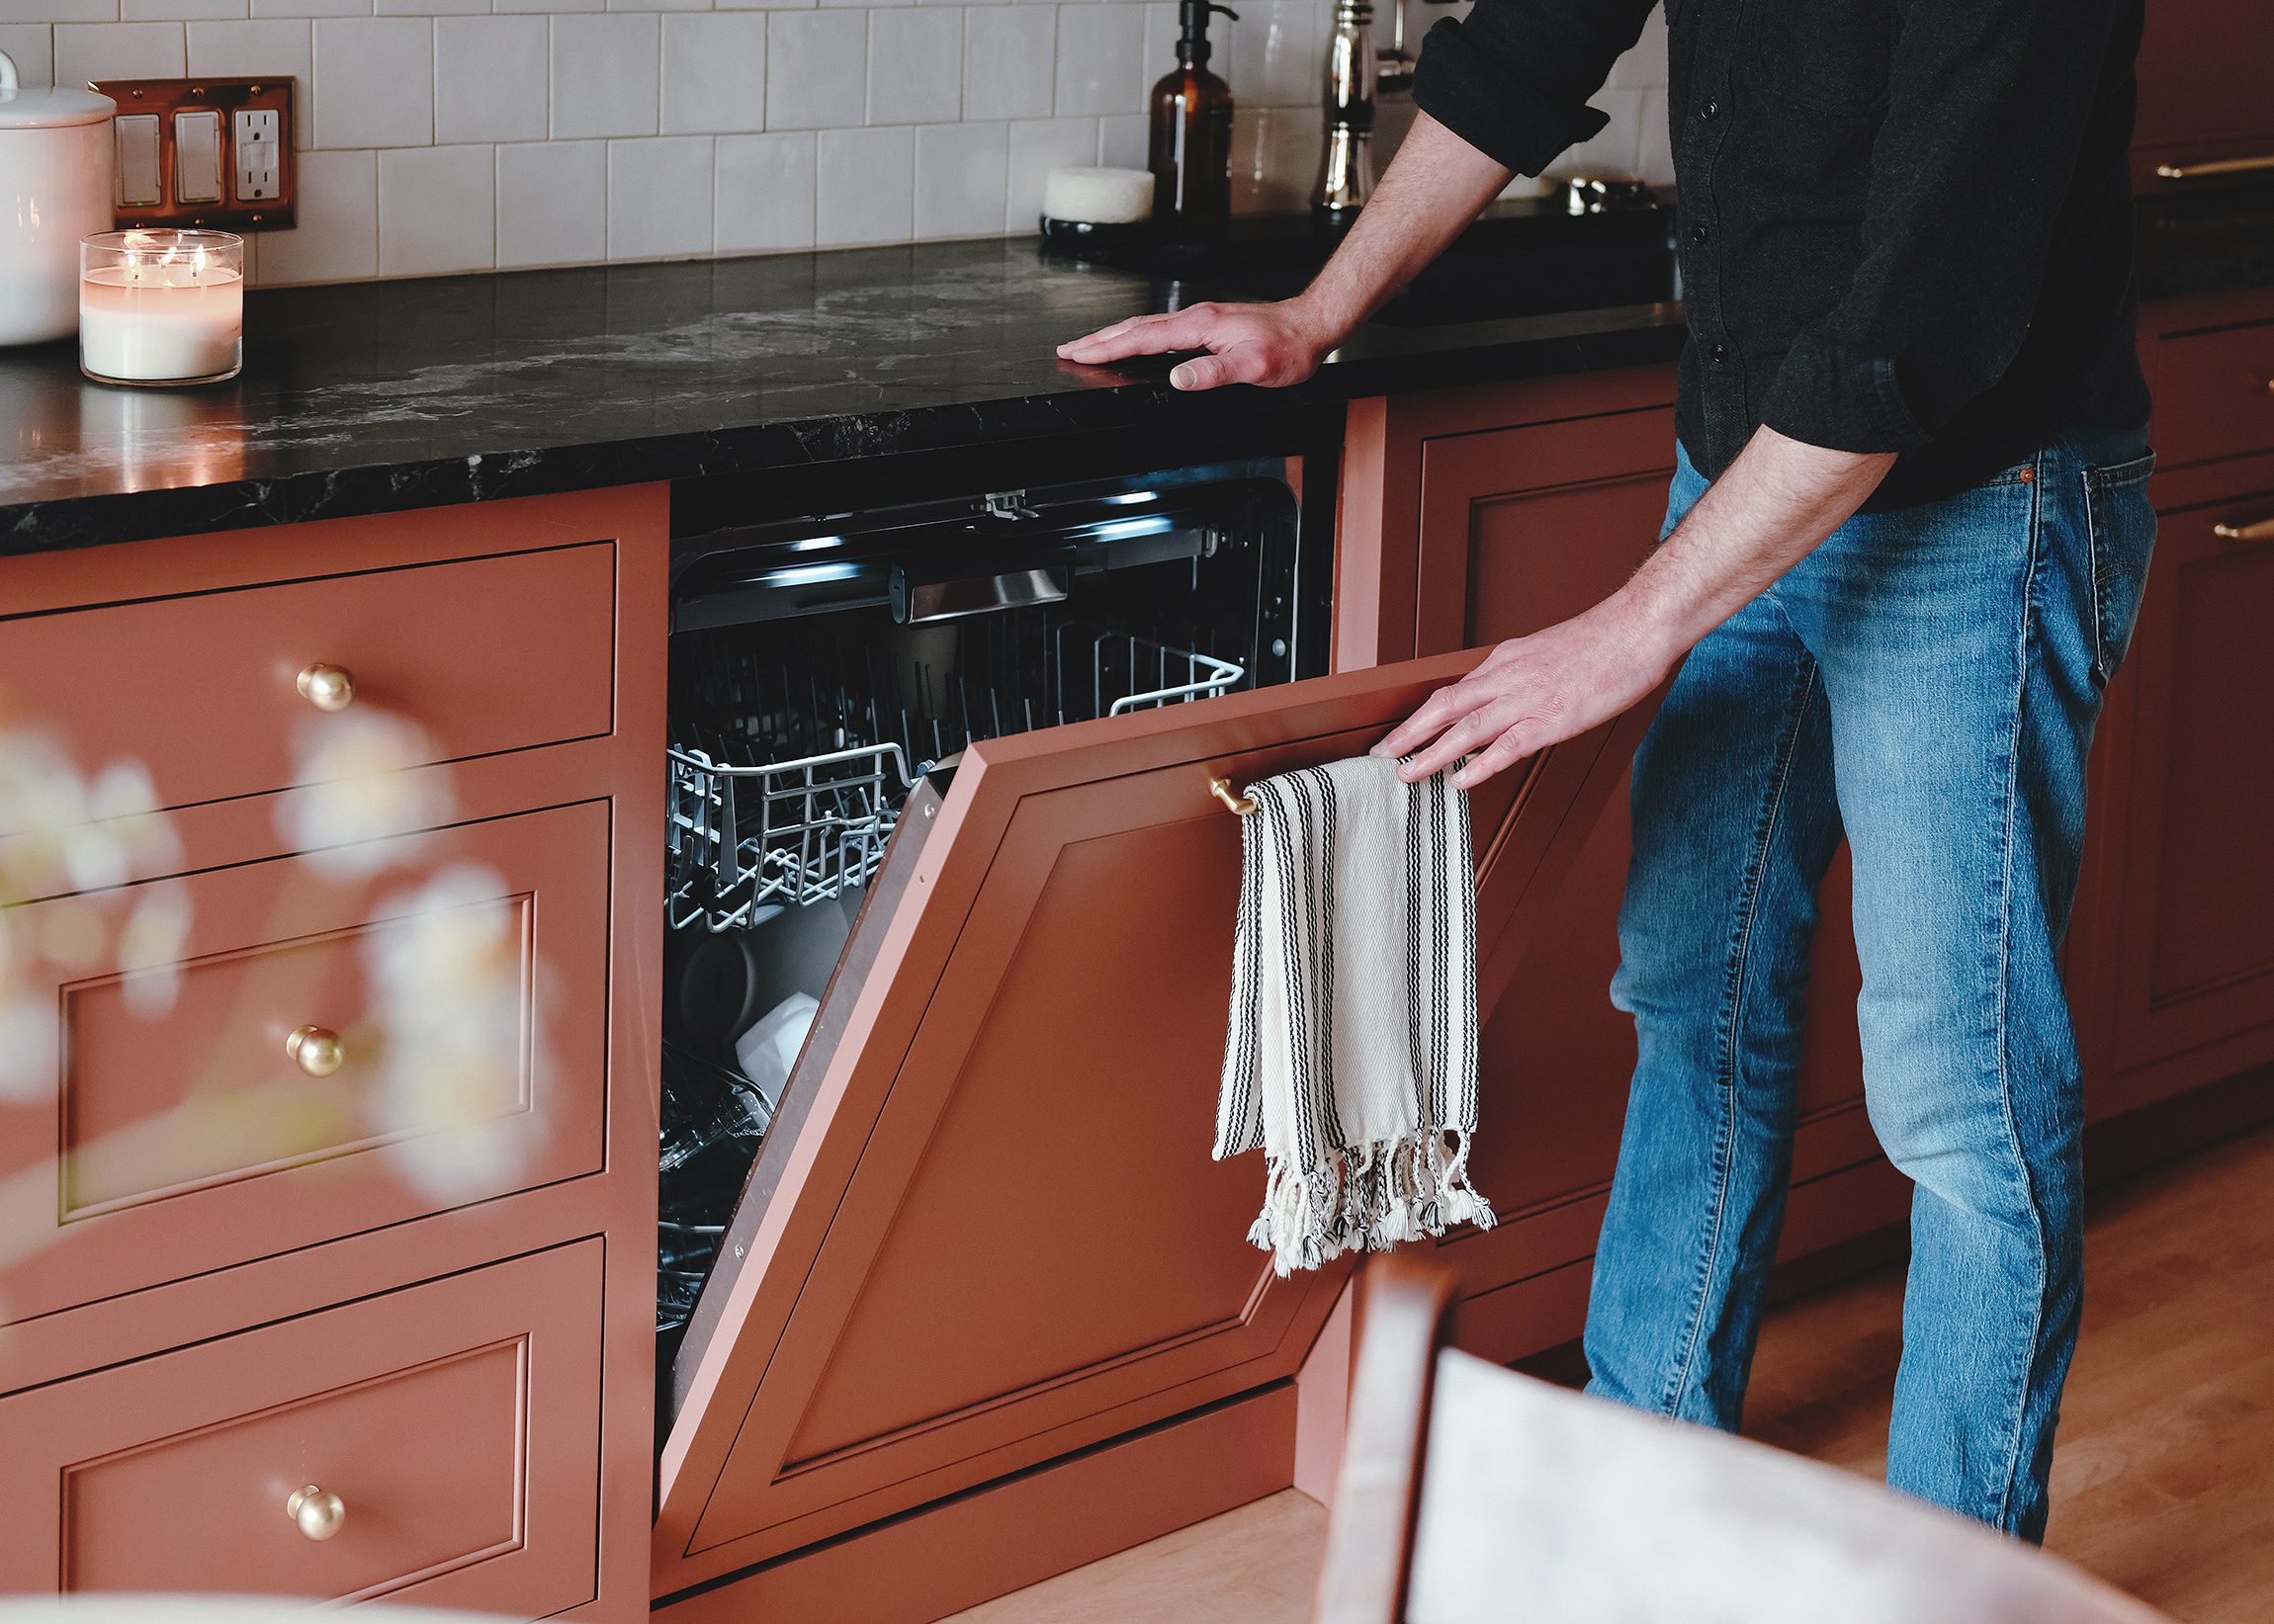 Scott loads the panel ready dishwasher in our newly renovated kitchen // via yellow brick home